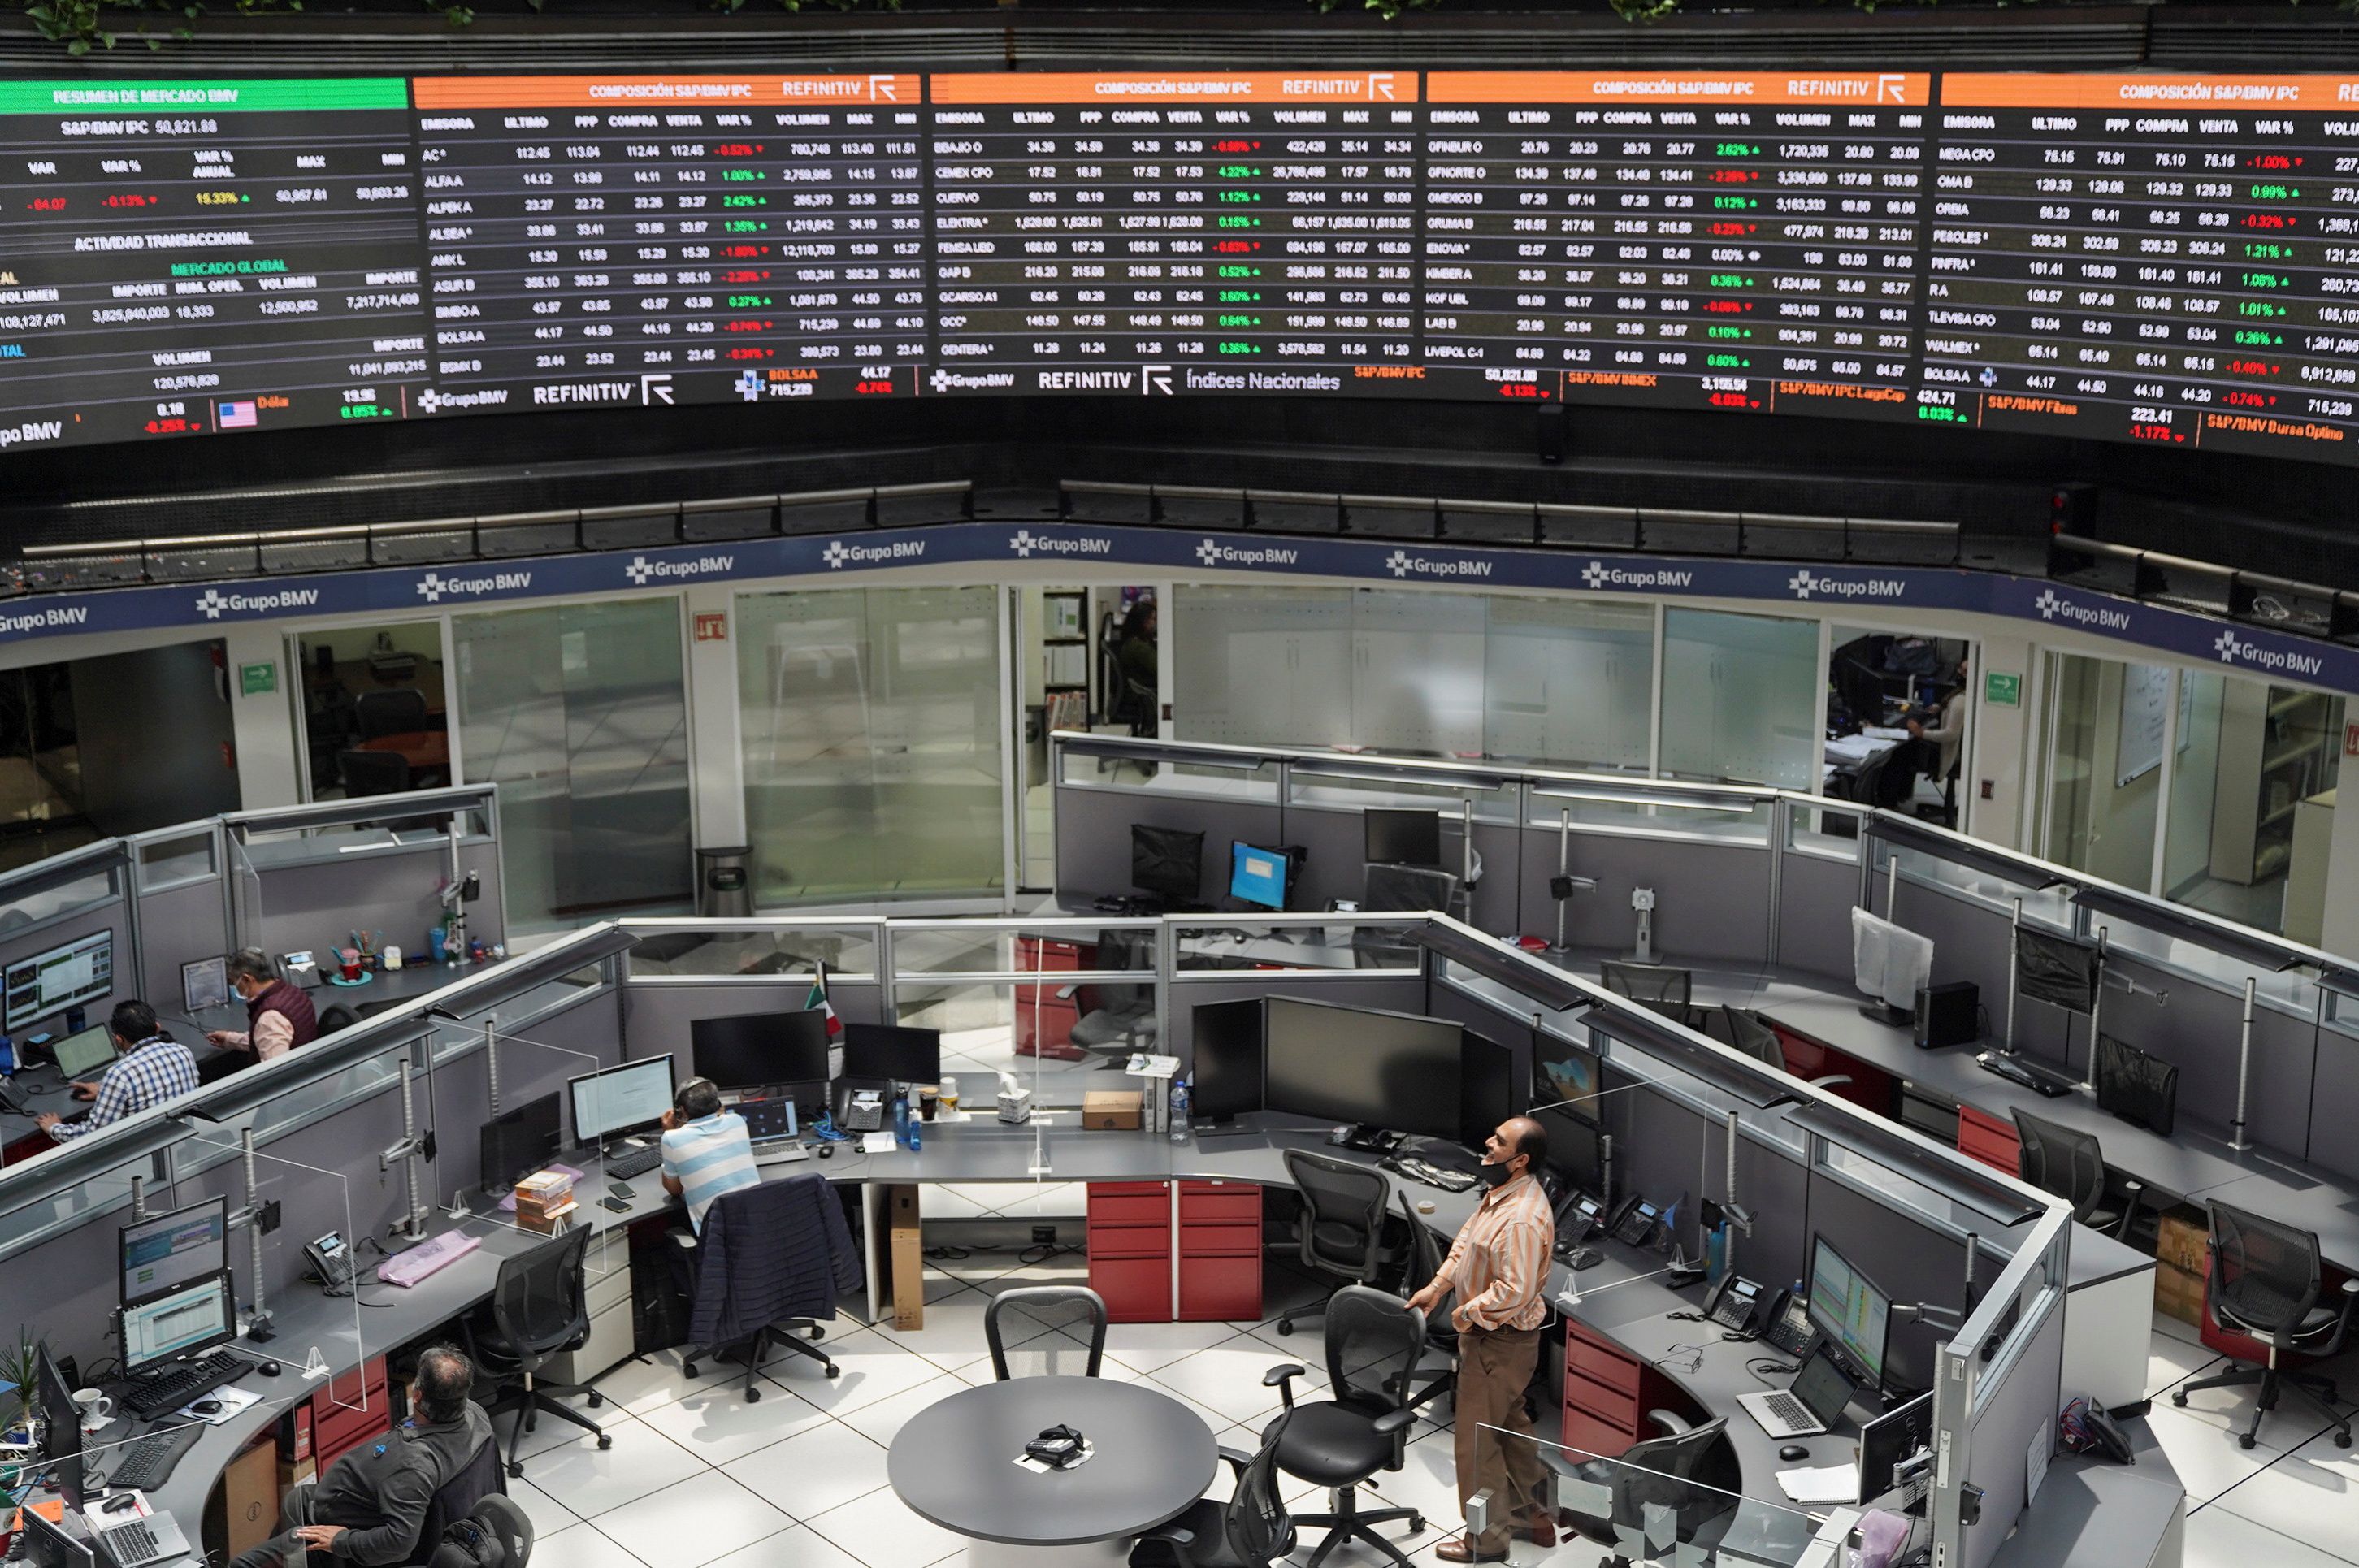 Employees work at their positions as a ticker displays stock exchange data at Mexico's stock exchange, in Mexico City